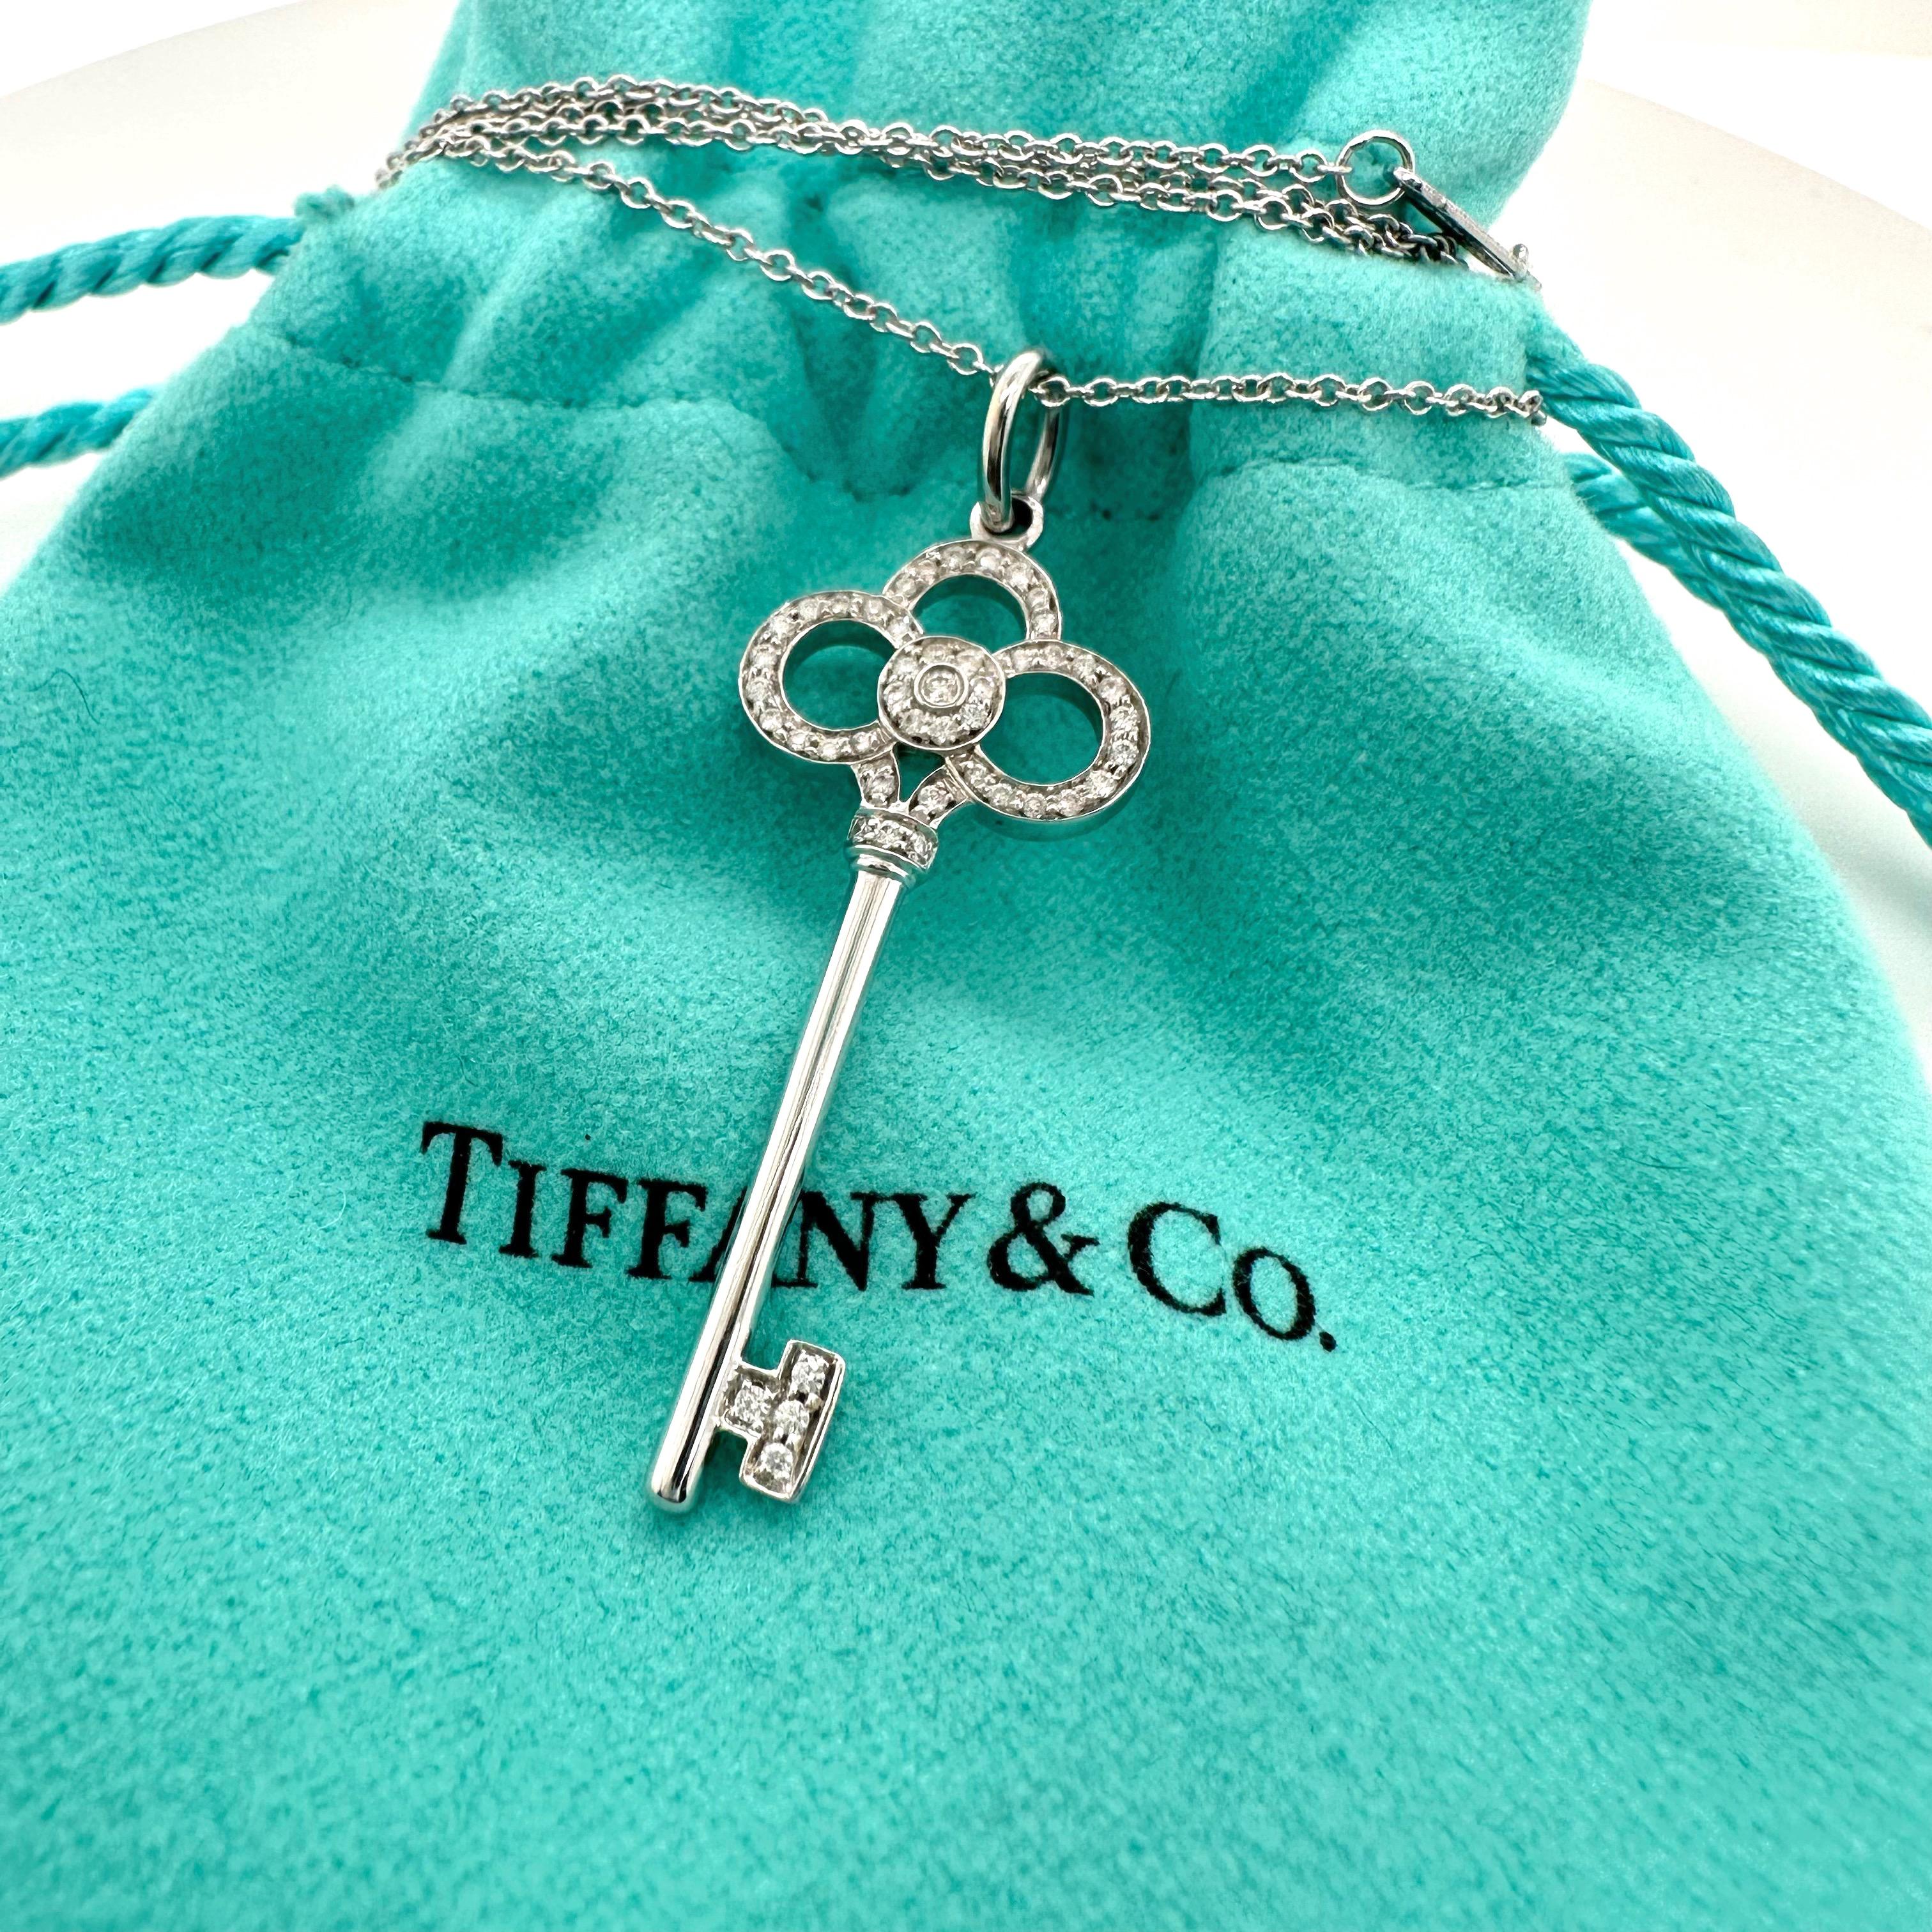 Tiffany & Co. Crown Key Diamond Pendant Necklace 18kt White Gold For Sale 1